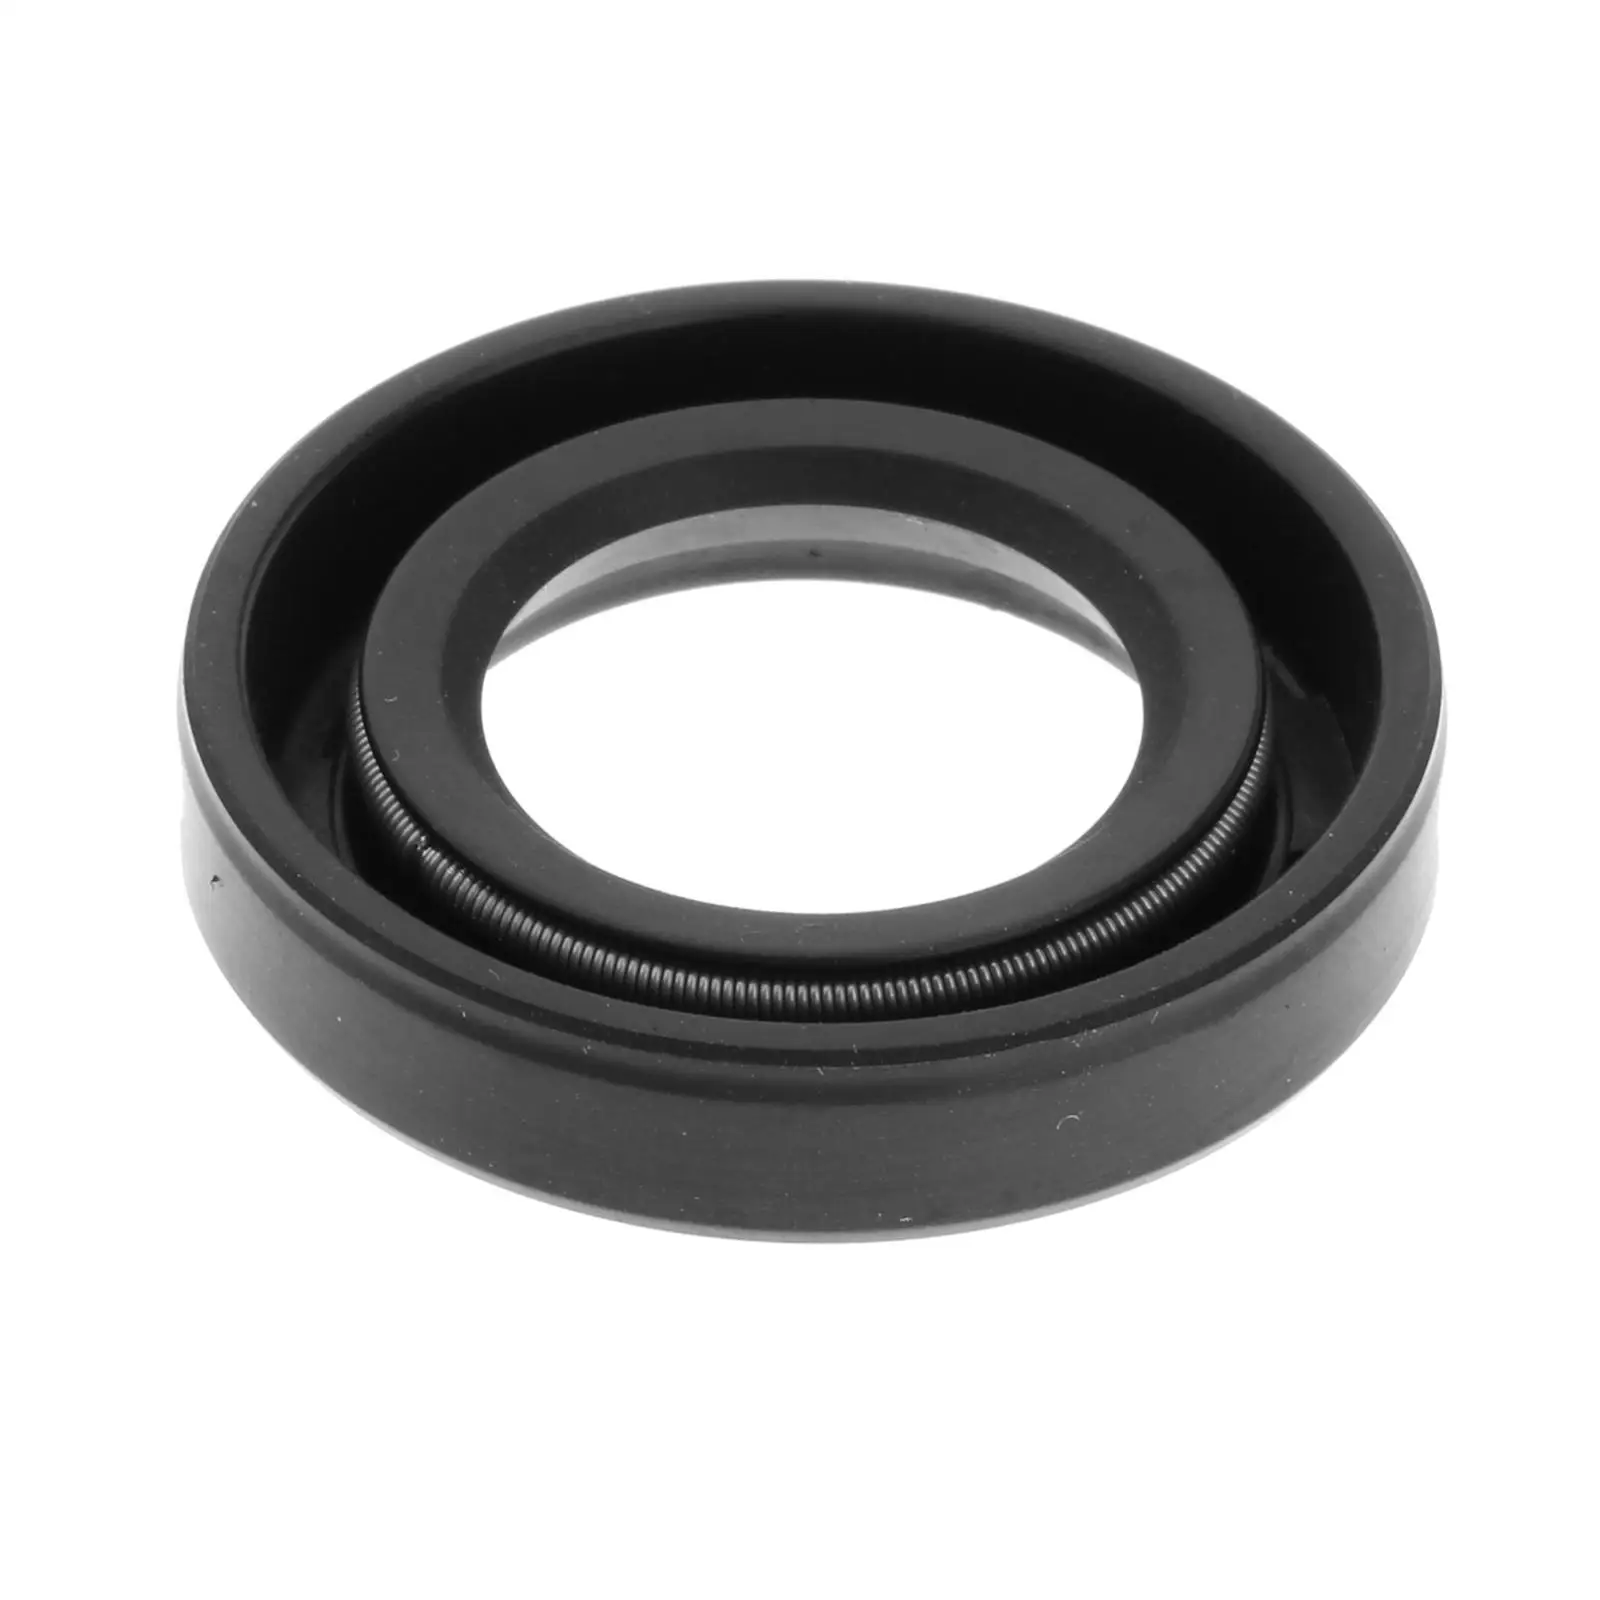 30mm Oil Seal Motocycle Accessory Replacements for Yamaha Outboard Engine Parts